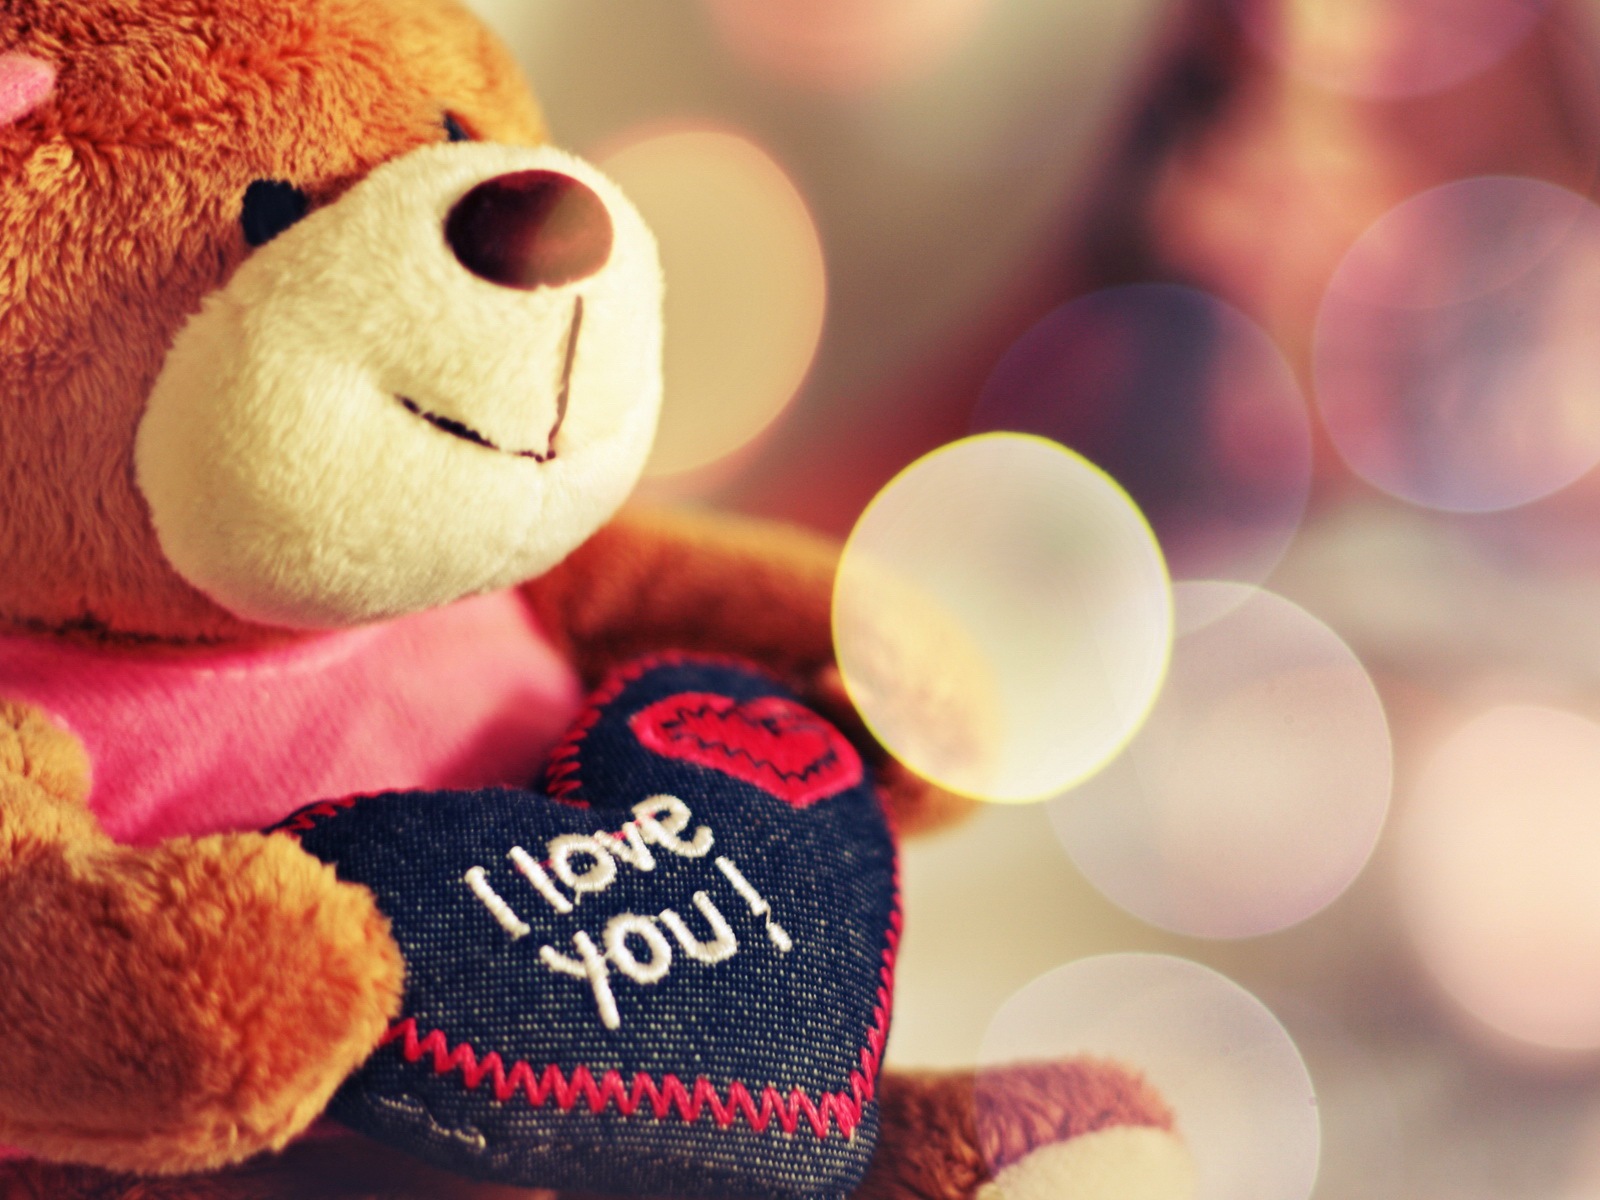 Warm and romantic Valentine's Day HD wallpapers #14 - 1600x1200